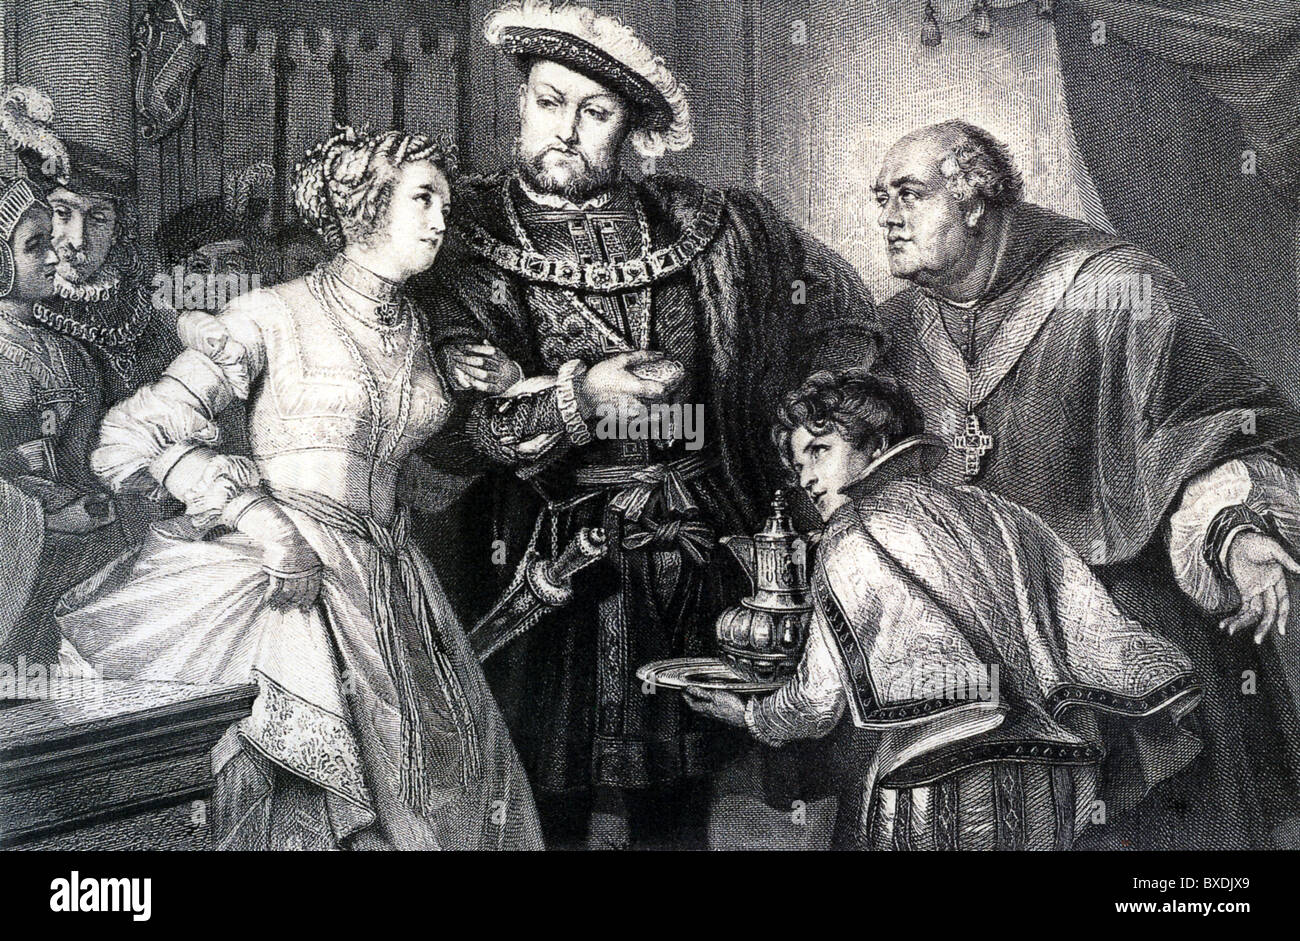 HENRY VIII and ANNE BOLEYN engraved by Johann Raab after painting by German artist August Pecht Stock Photo